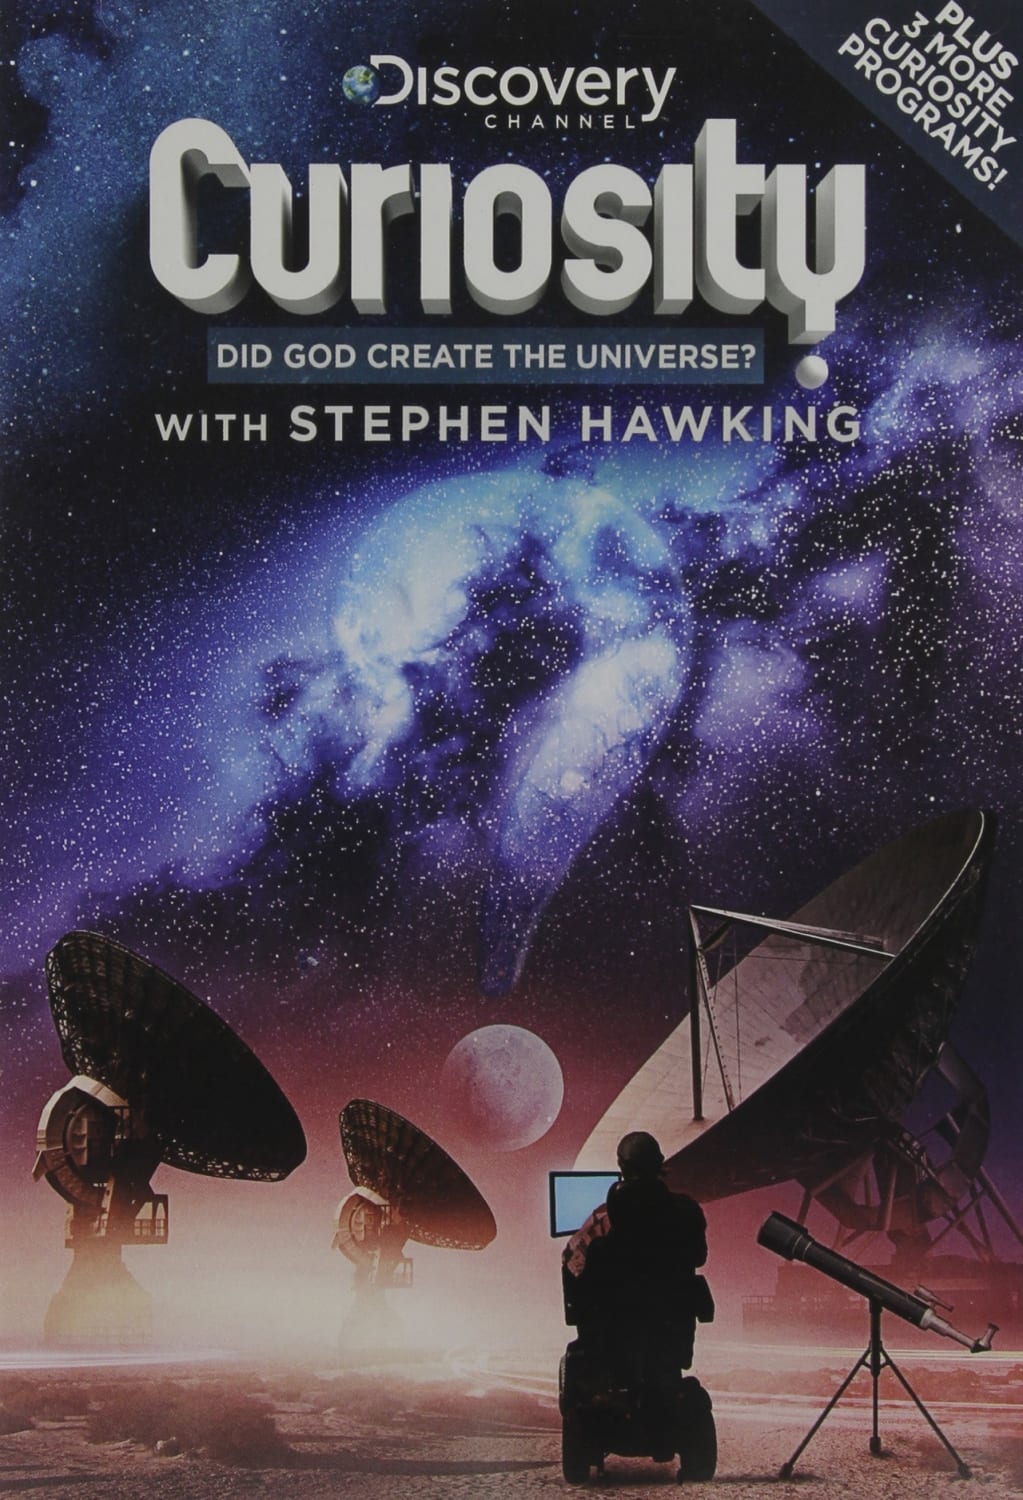 Curiosity: Did God Create The Universe? with Stephen Hawking (DVD) on MovieShack